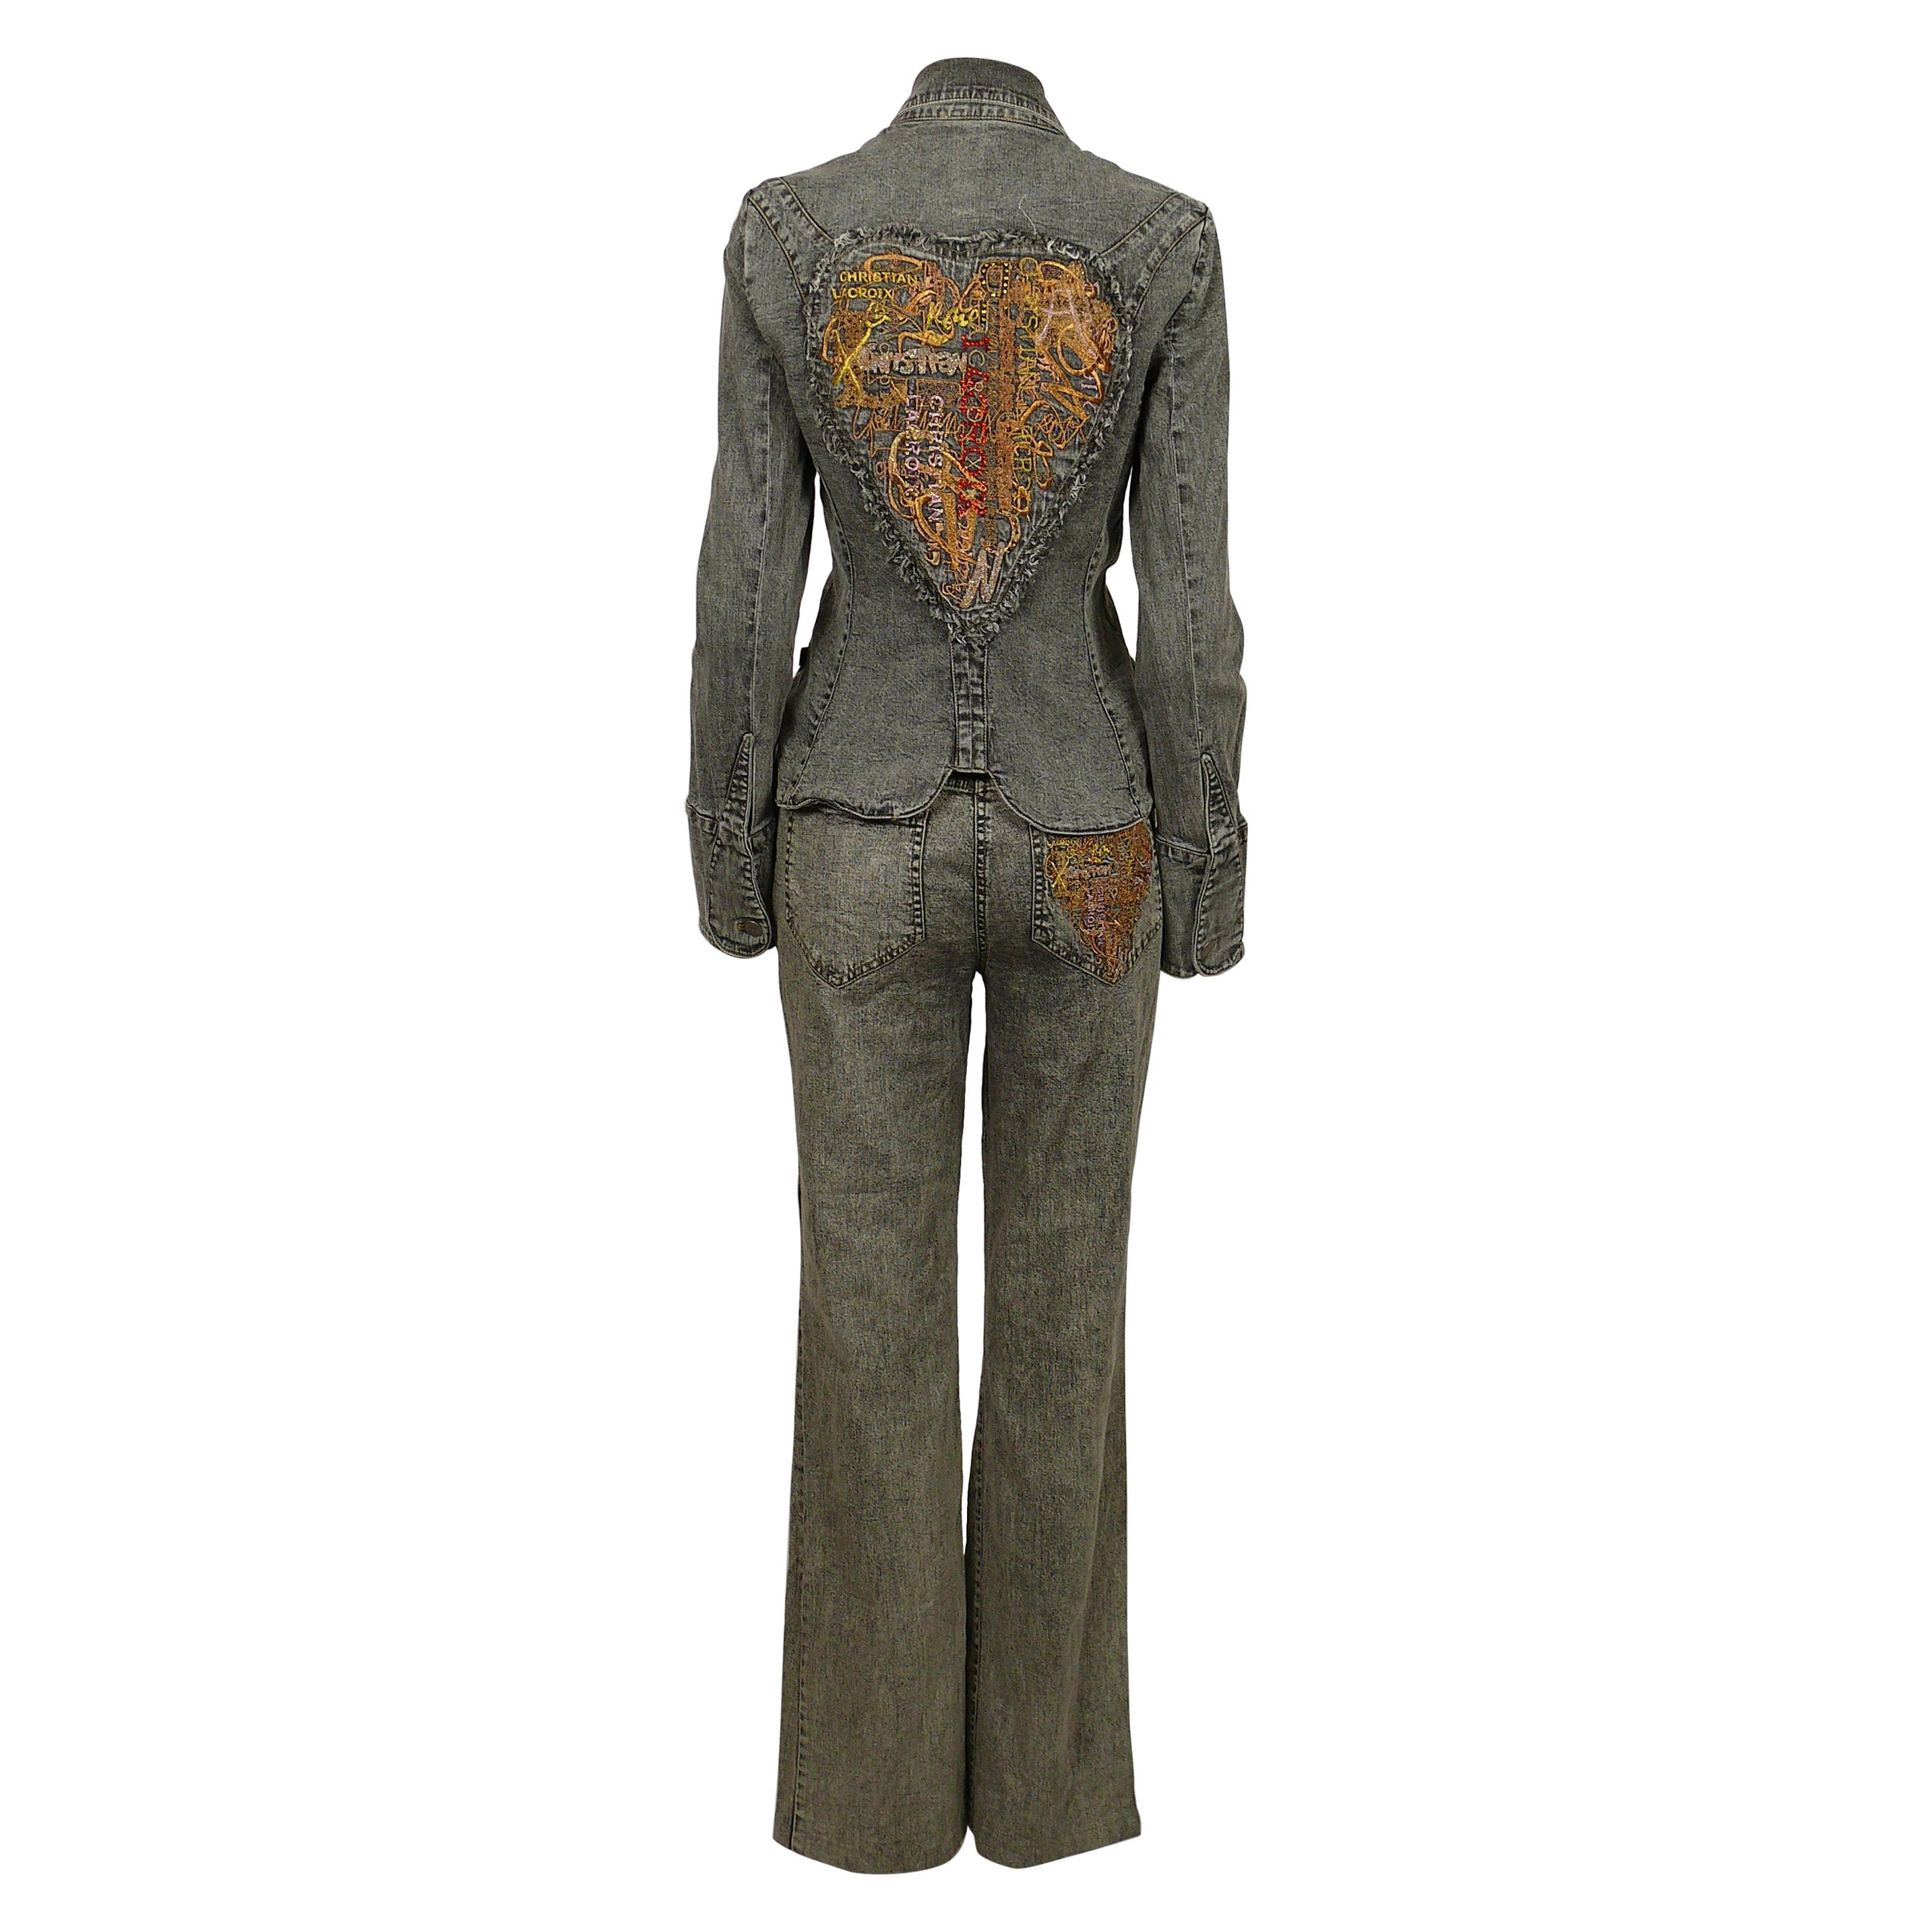 Christian Lacroix Jeans Vintage Embroidered Heart Denim Jacket & Trousers